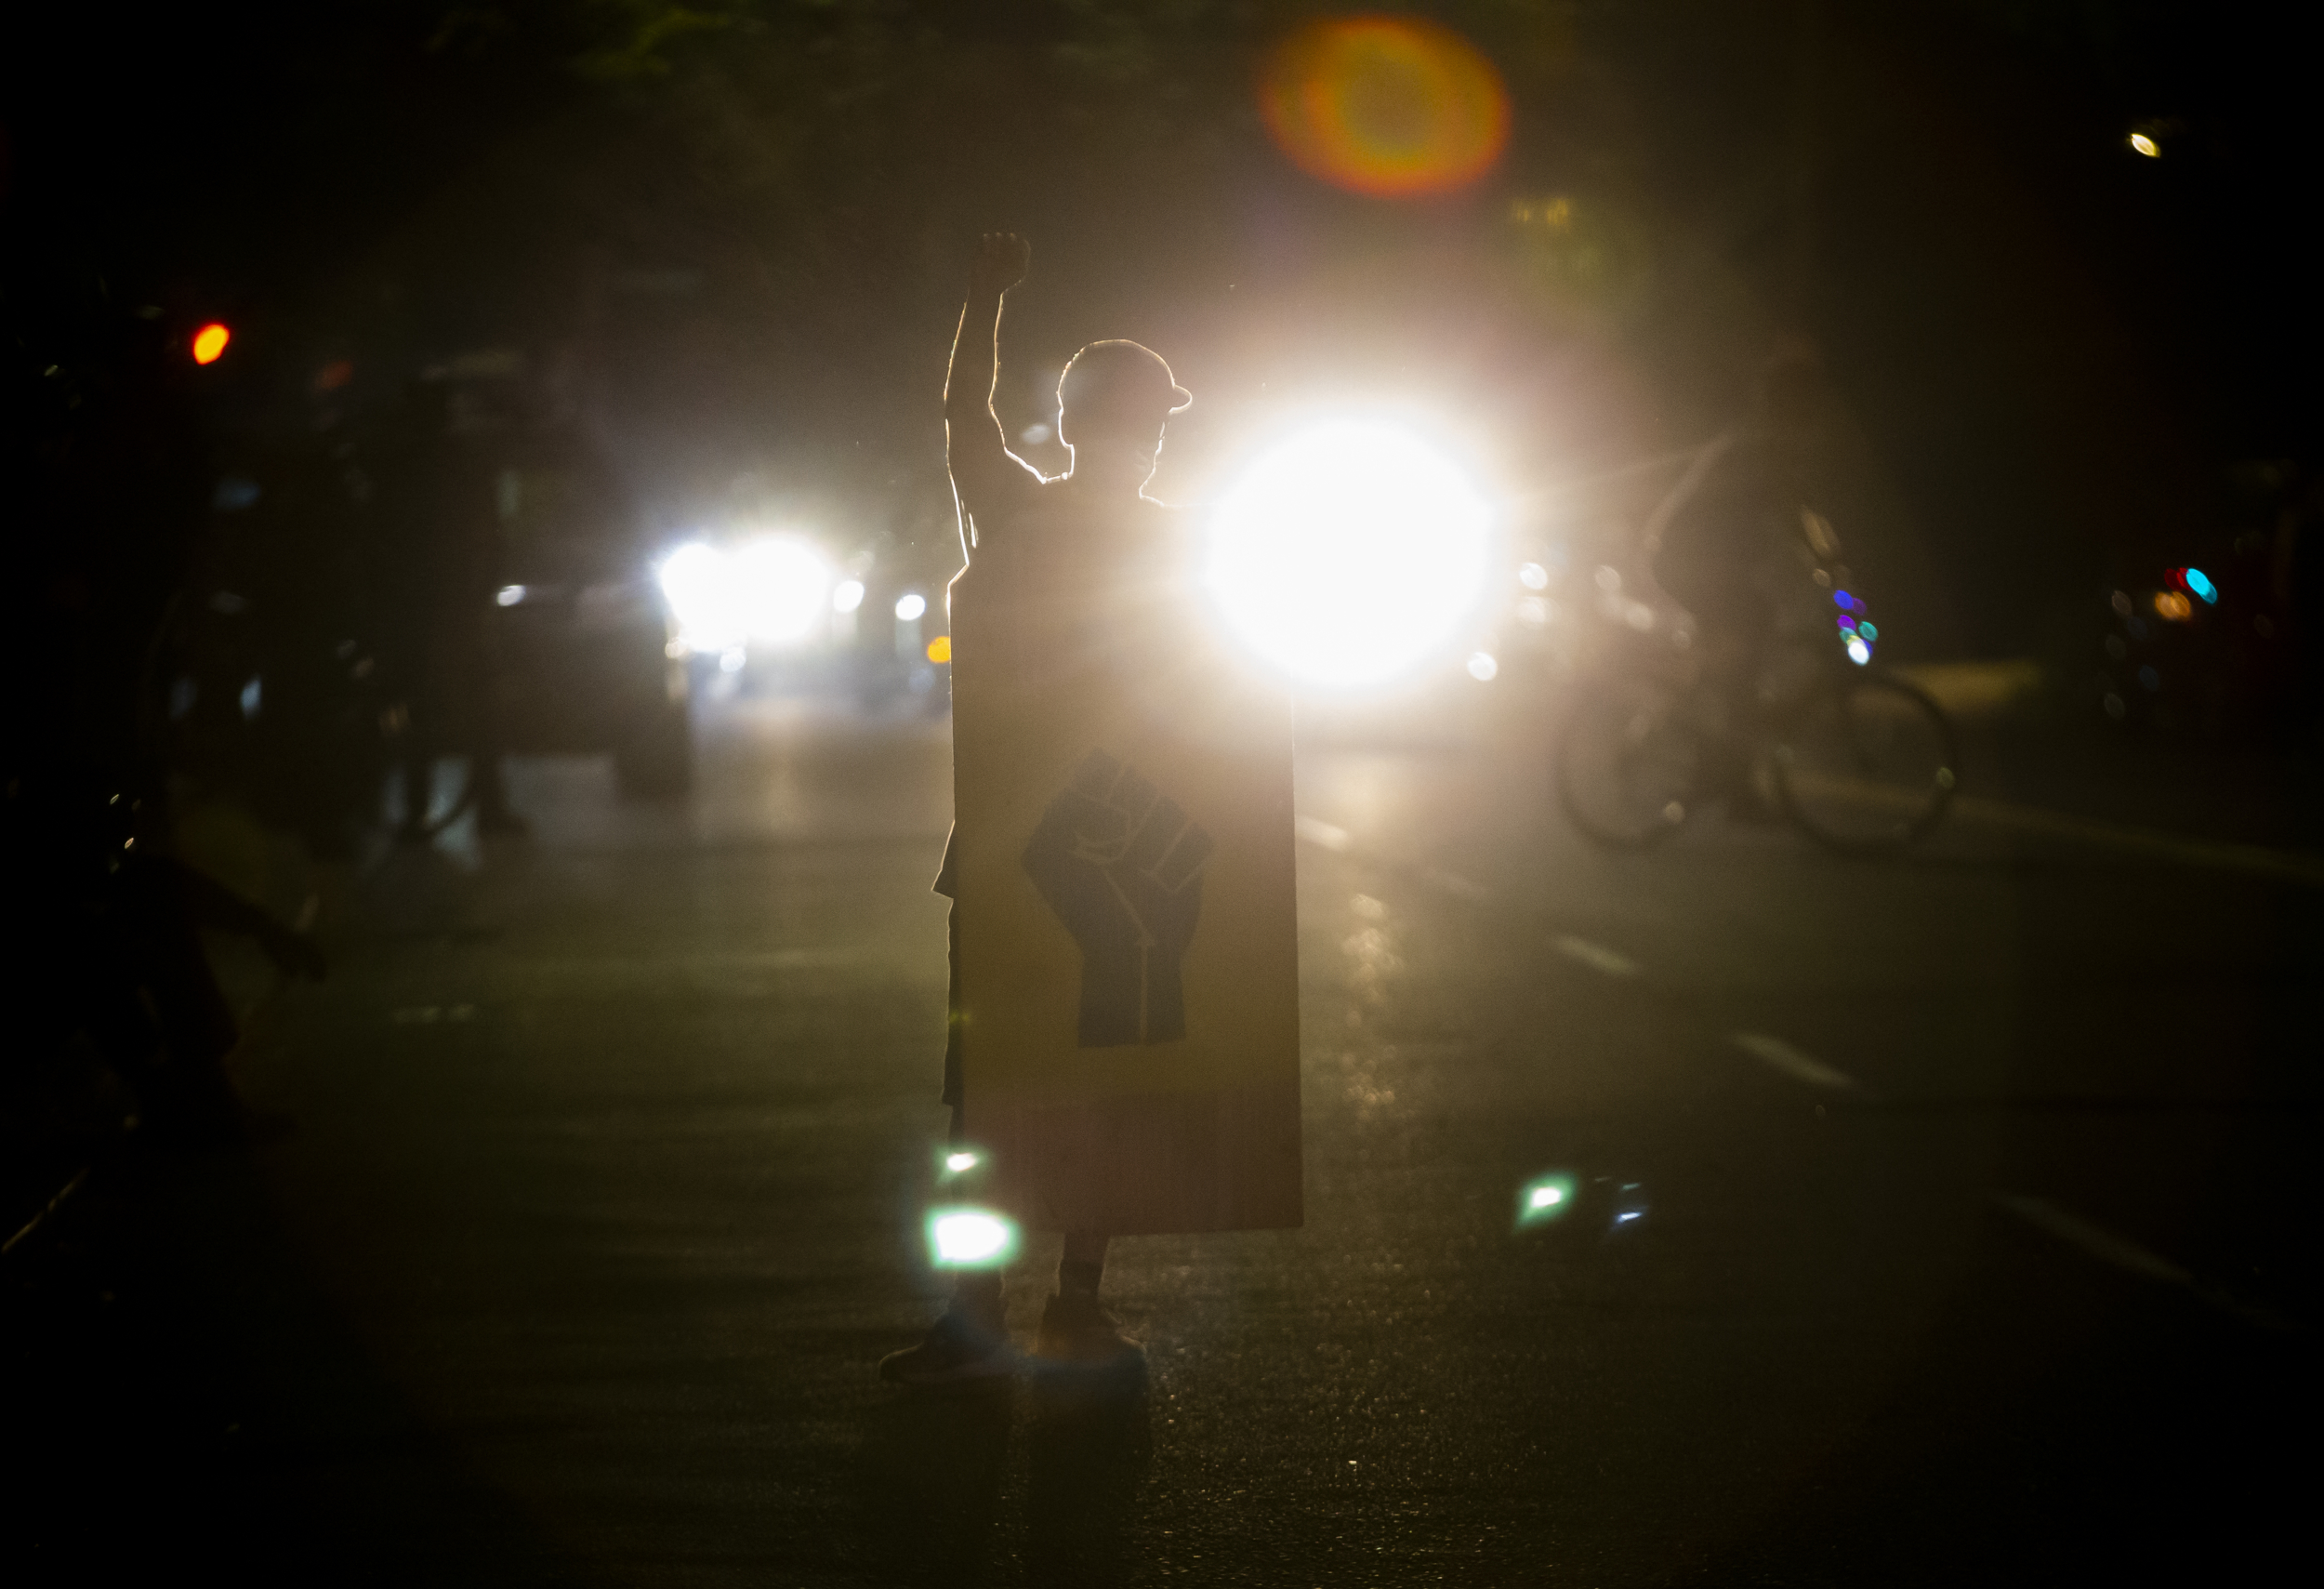 Police declared a riot around midnight as Portland protests continued for the 80th consecutive night Saturday, Aug. 15, 2020. Protesters gathered at Laurelhurst Park Saturday evening before marching to the Penumbra Kelly building. Dave Killen/Staff